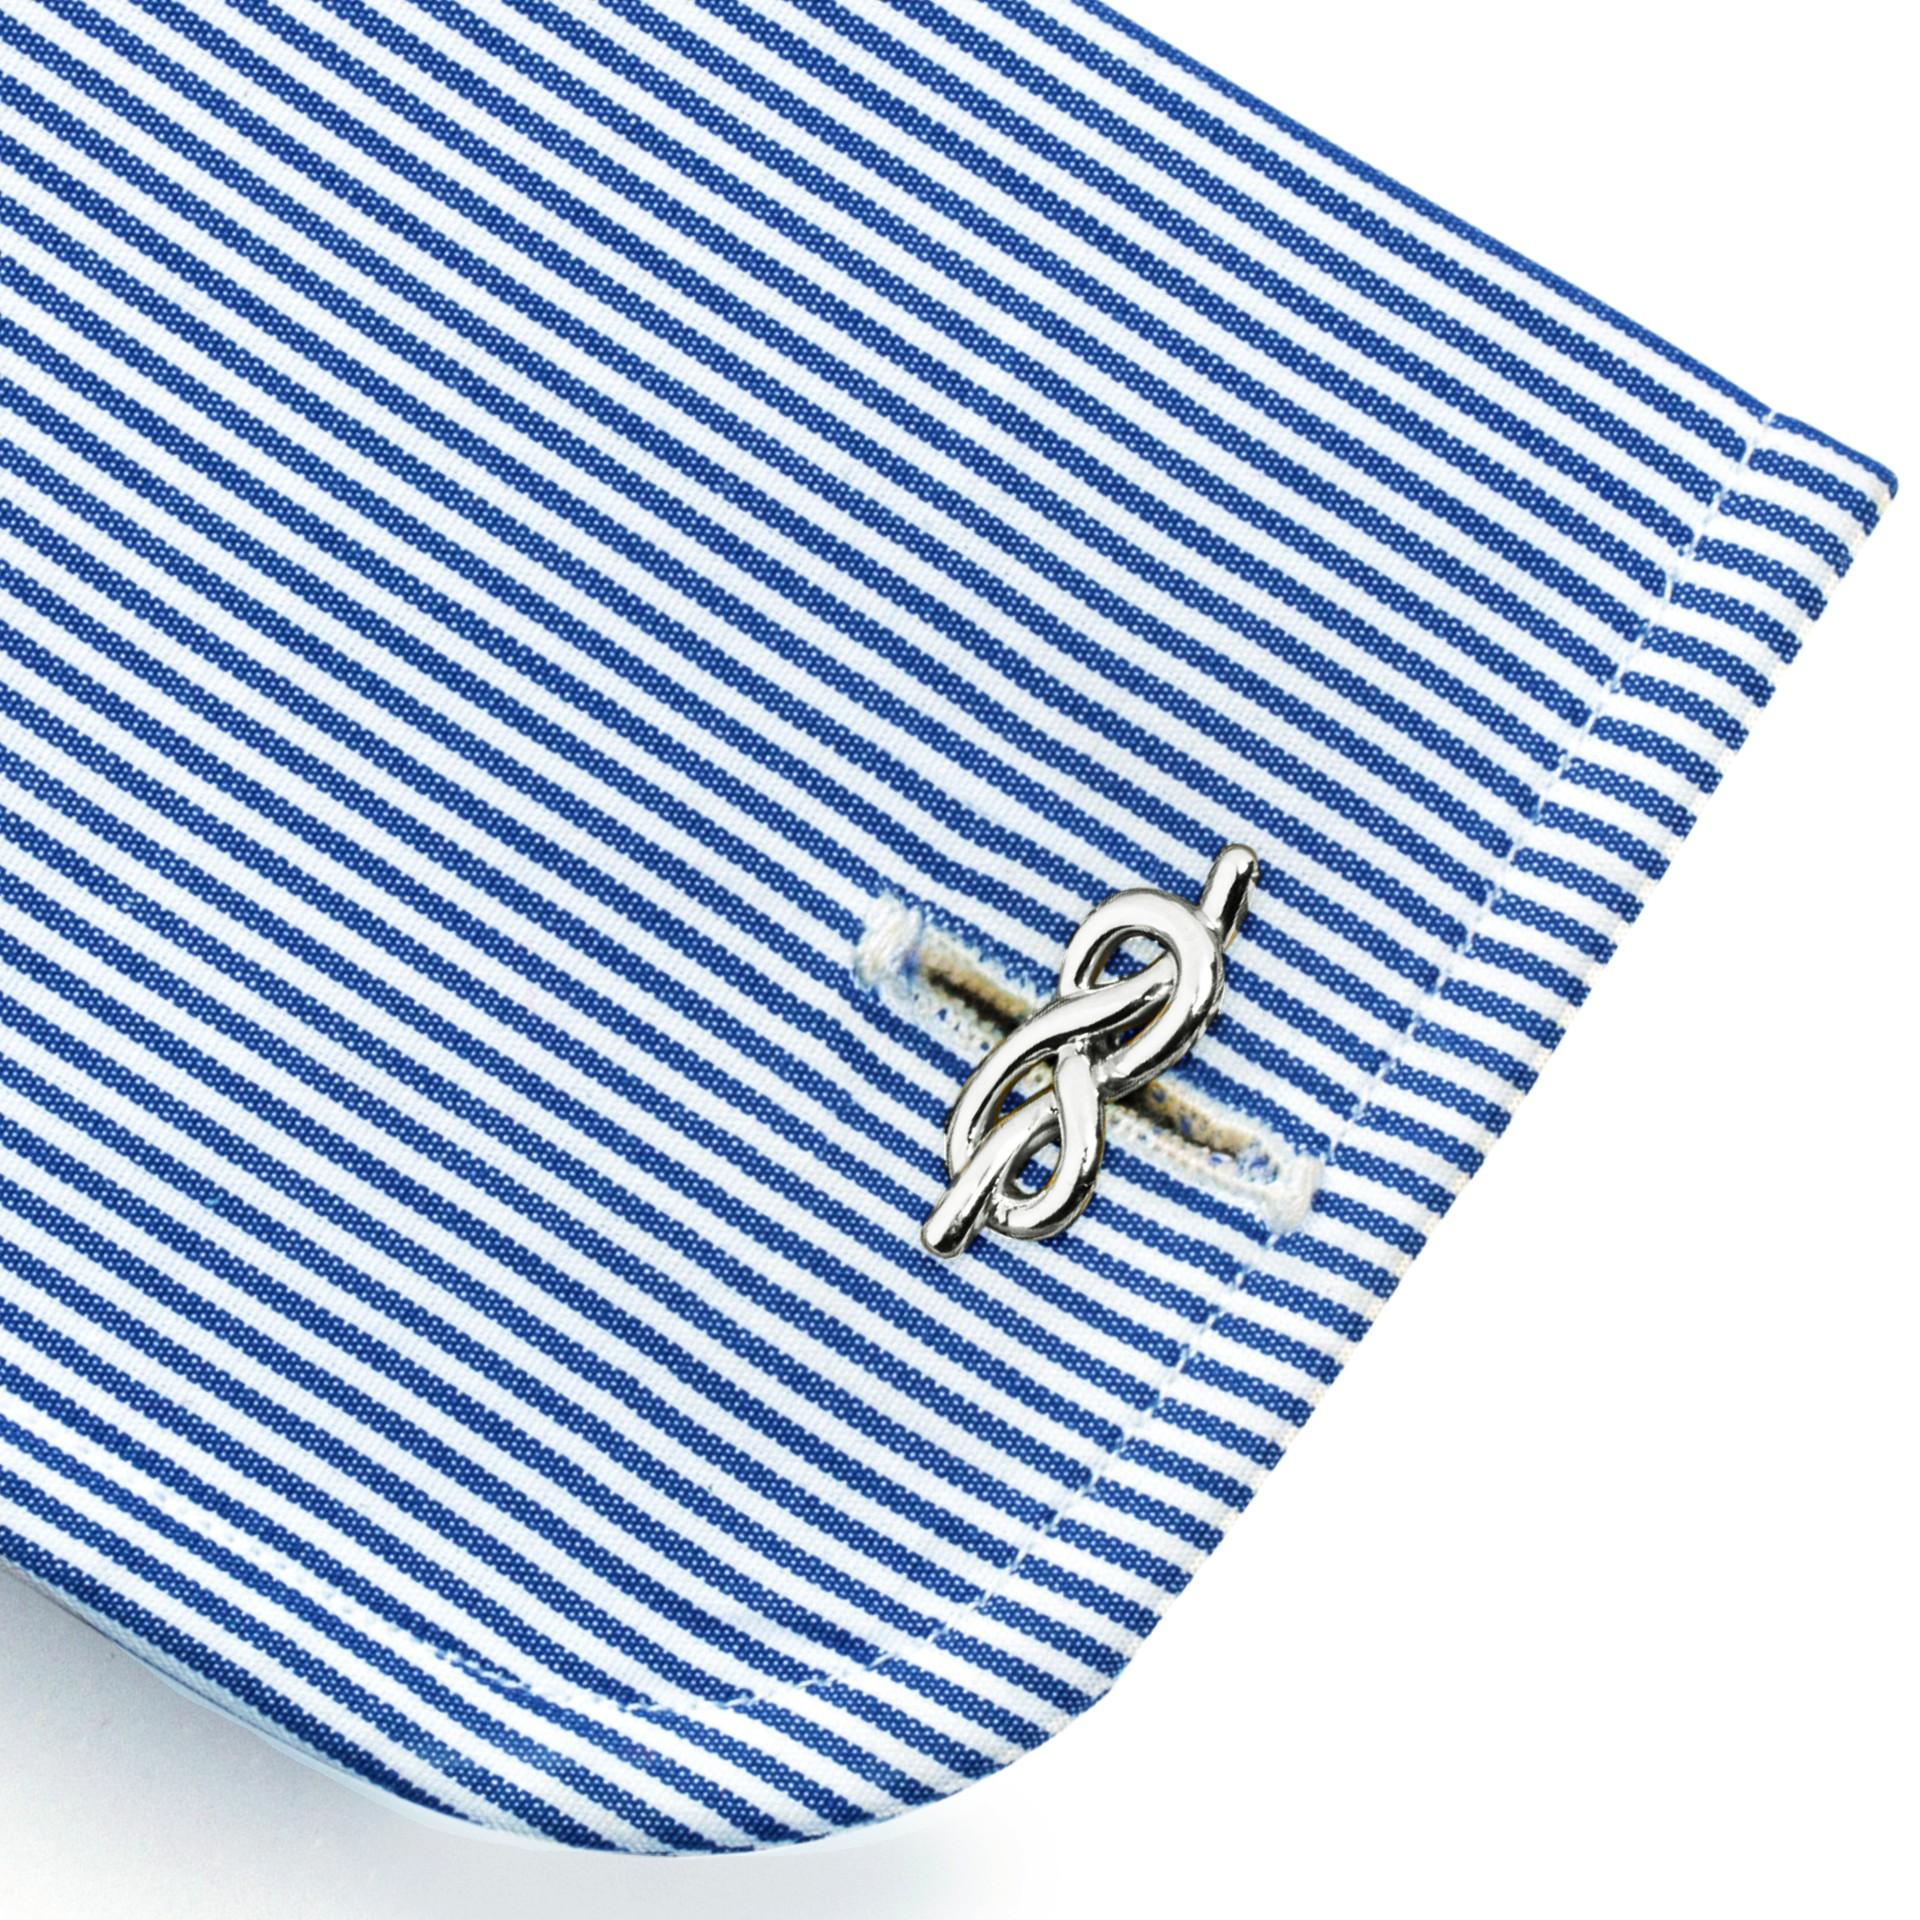 Alex Jona design collection, hand crafted in Italy, Rhodium plated Sterling Silver knot cufflinks. Marked JONA 925. 

Alex Jona cufflinks stand out, not only for their special design and for the excellent quality, but also for the careful attention